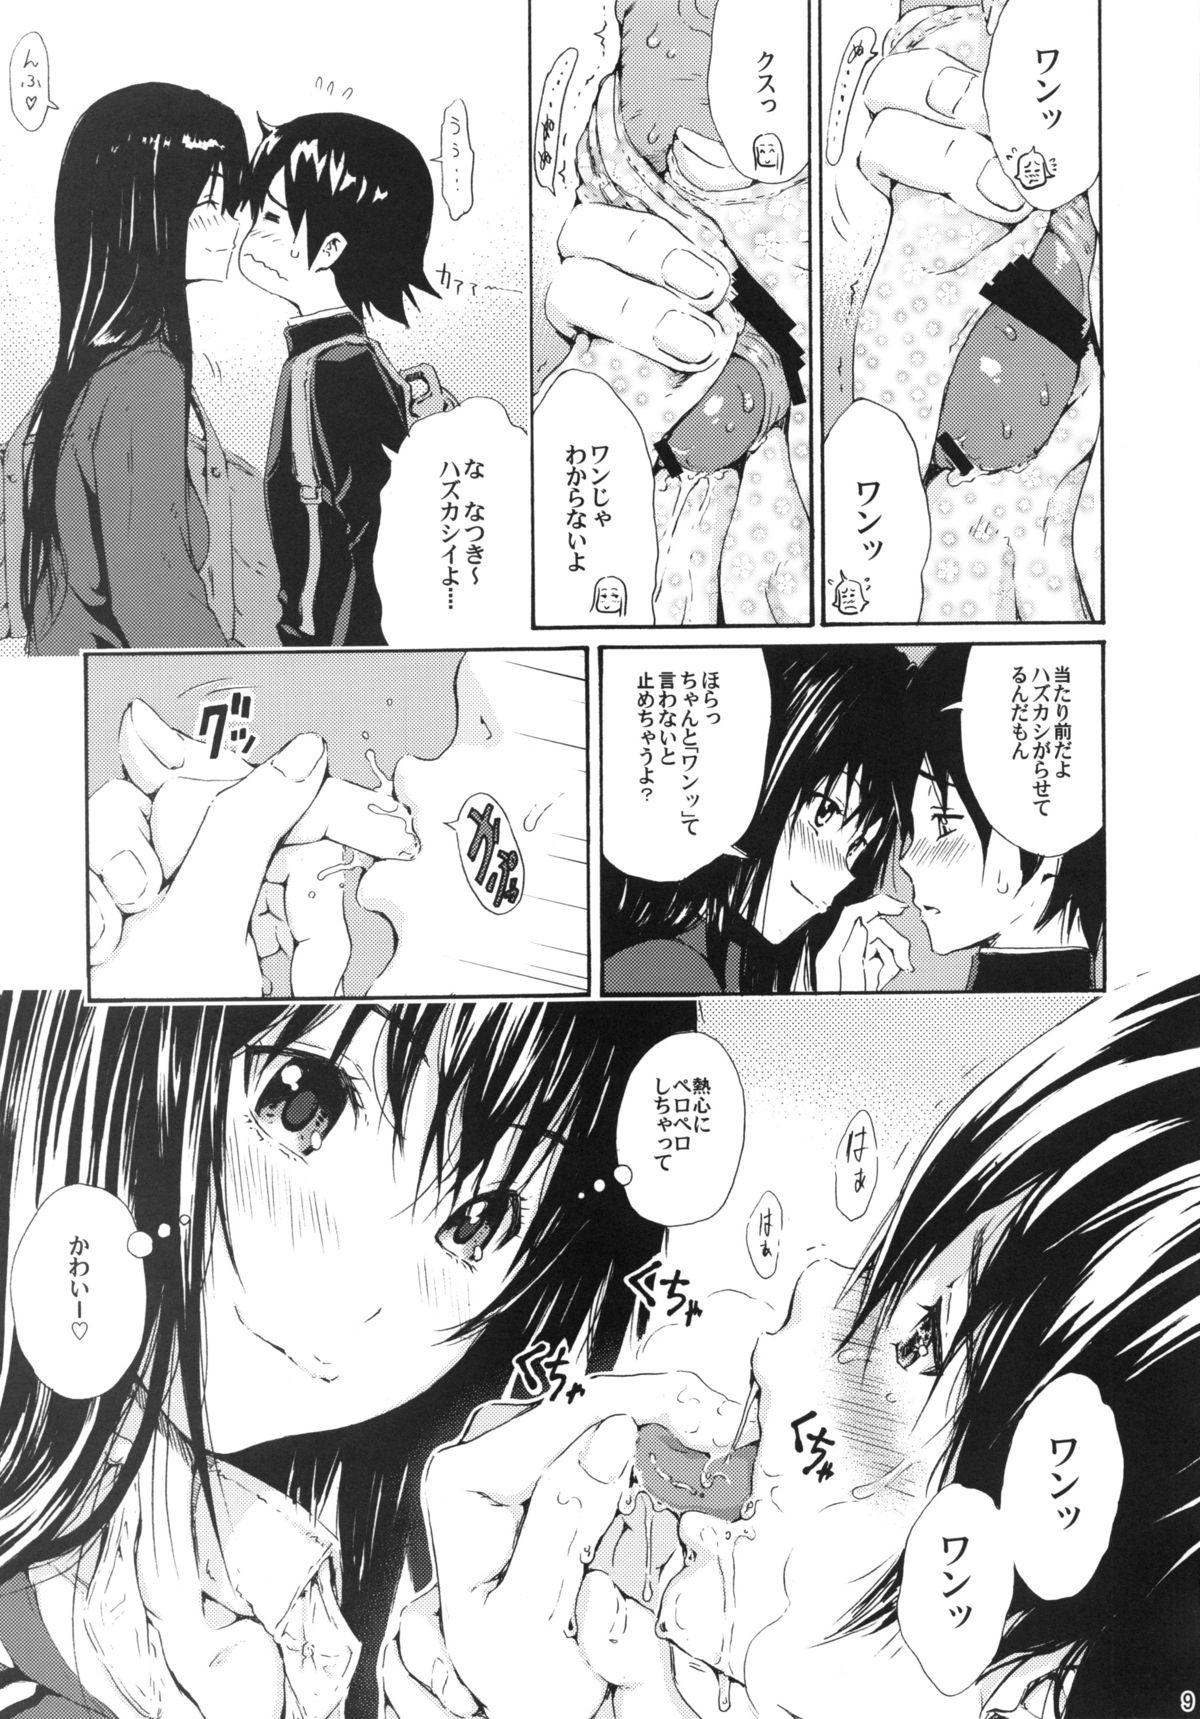 Wives seventeen vol. 8 - Ane doki Asiansex - Page 6